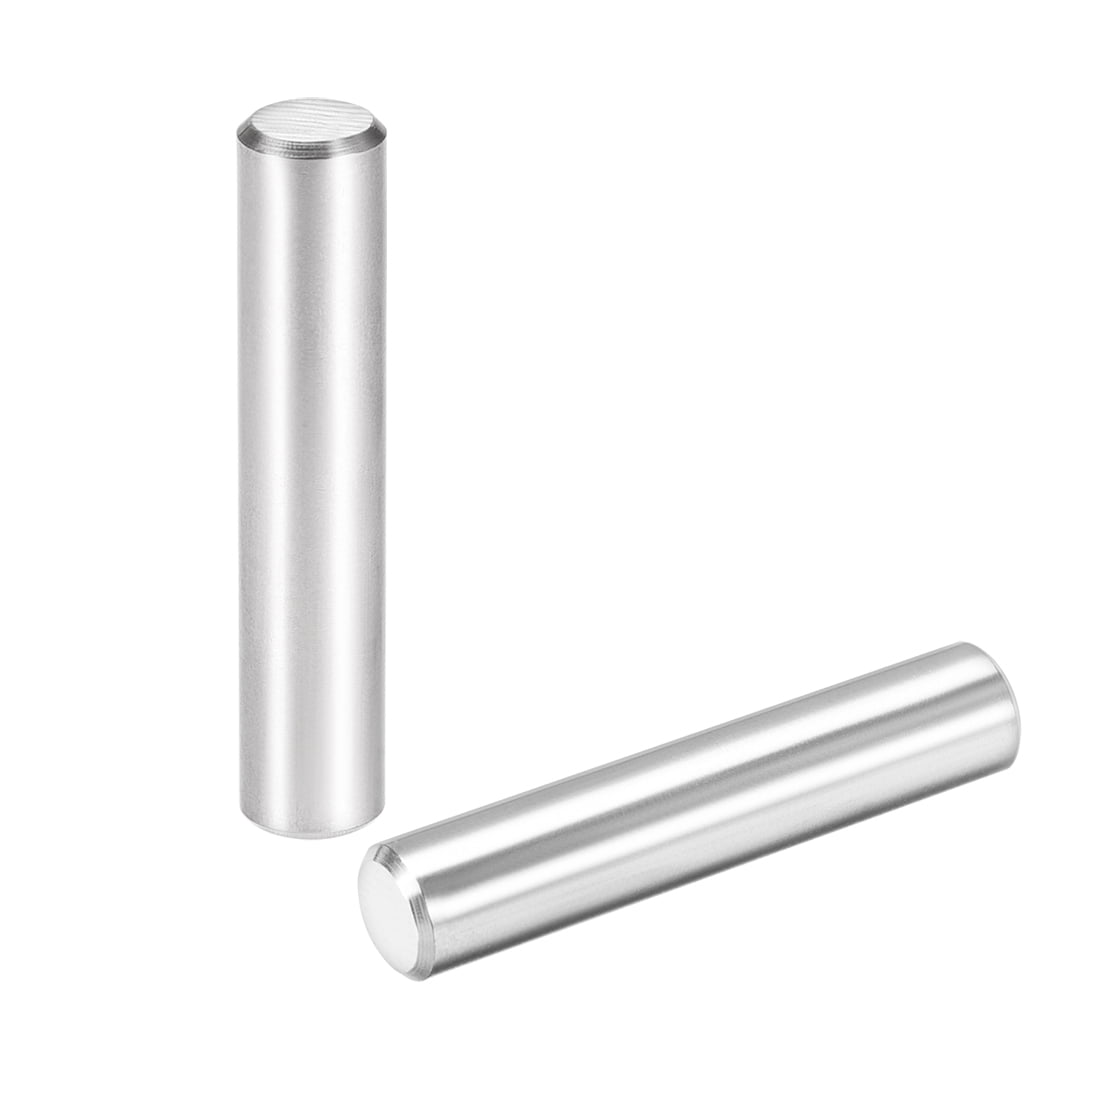 uxcell 3Pcs 10mm X 50mm Dowel Pin 304 Stainless Steel Cylindrical Shelf Support Pin Fasten Elements Silver Tone 